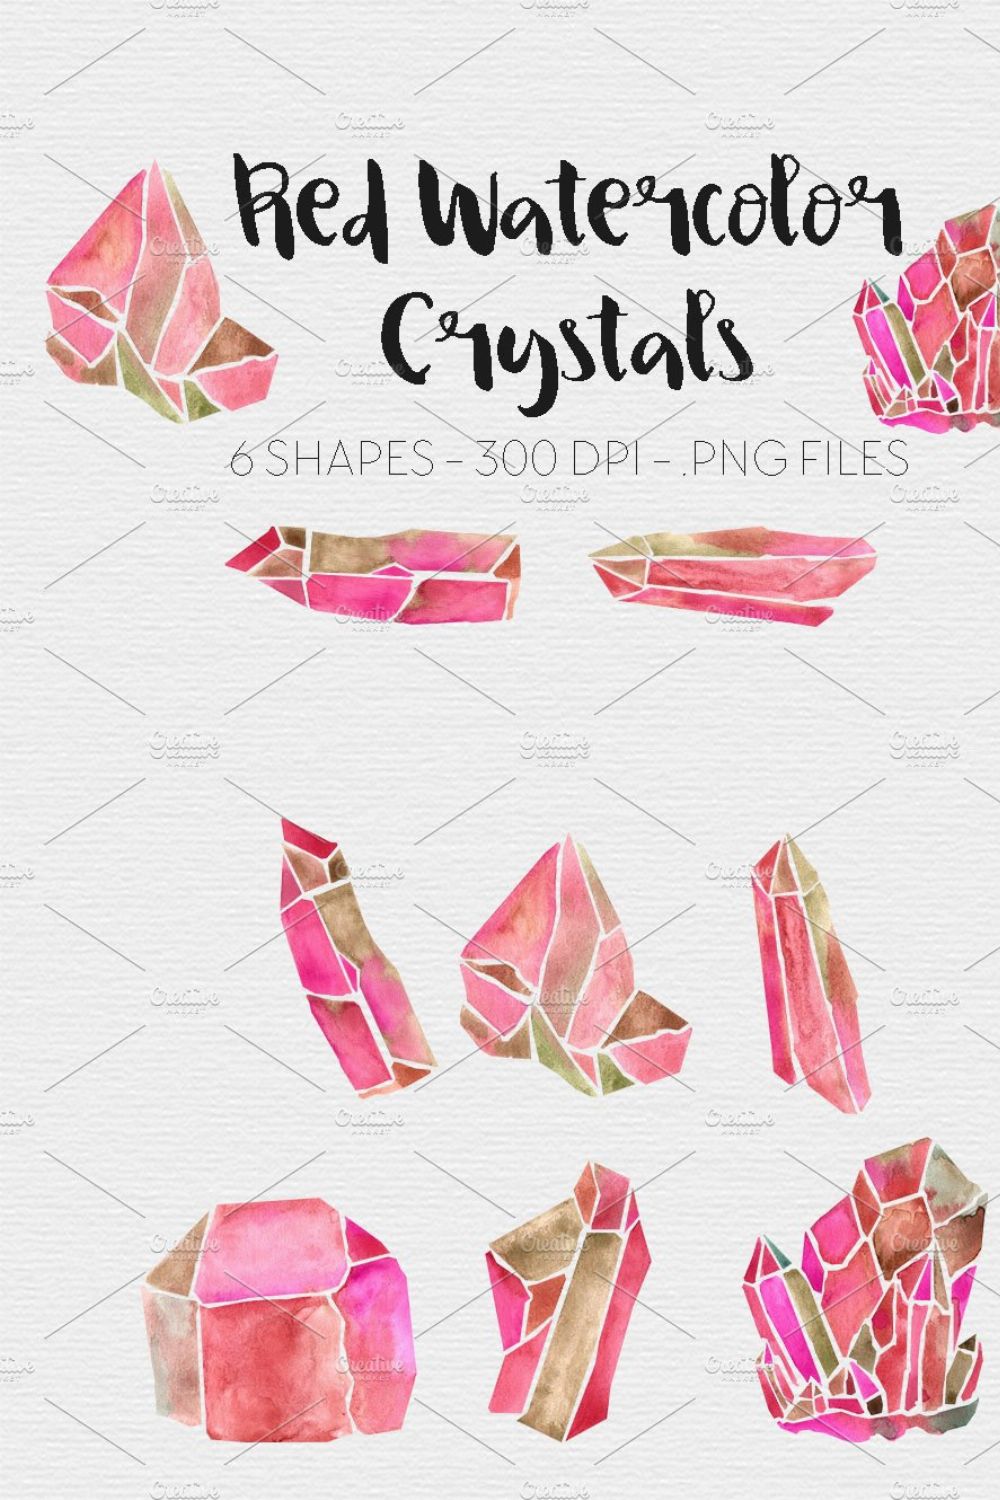 Red Watercolor Crystal Clipart pinterest preview image.